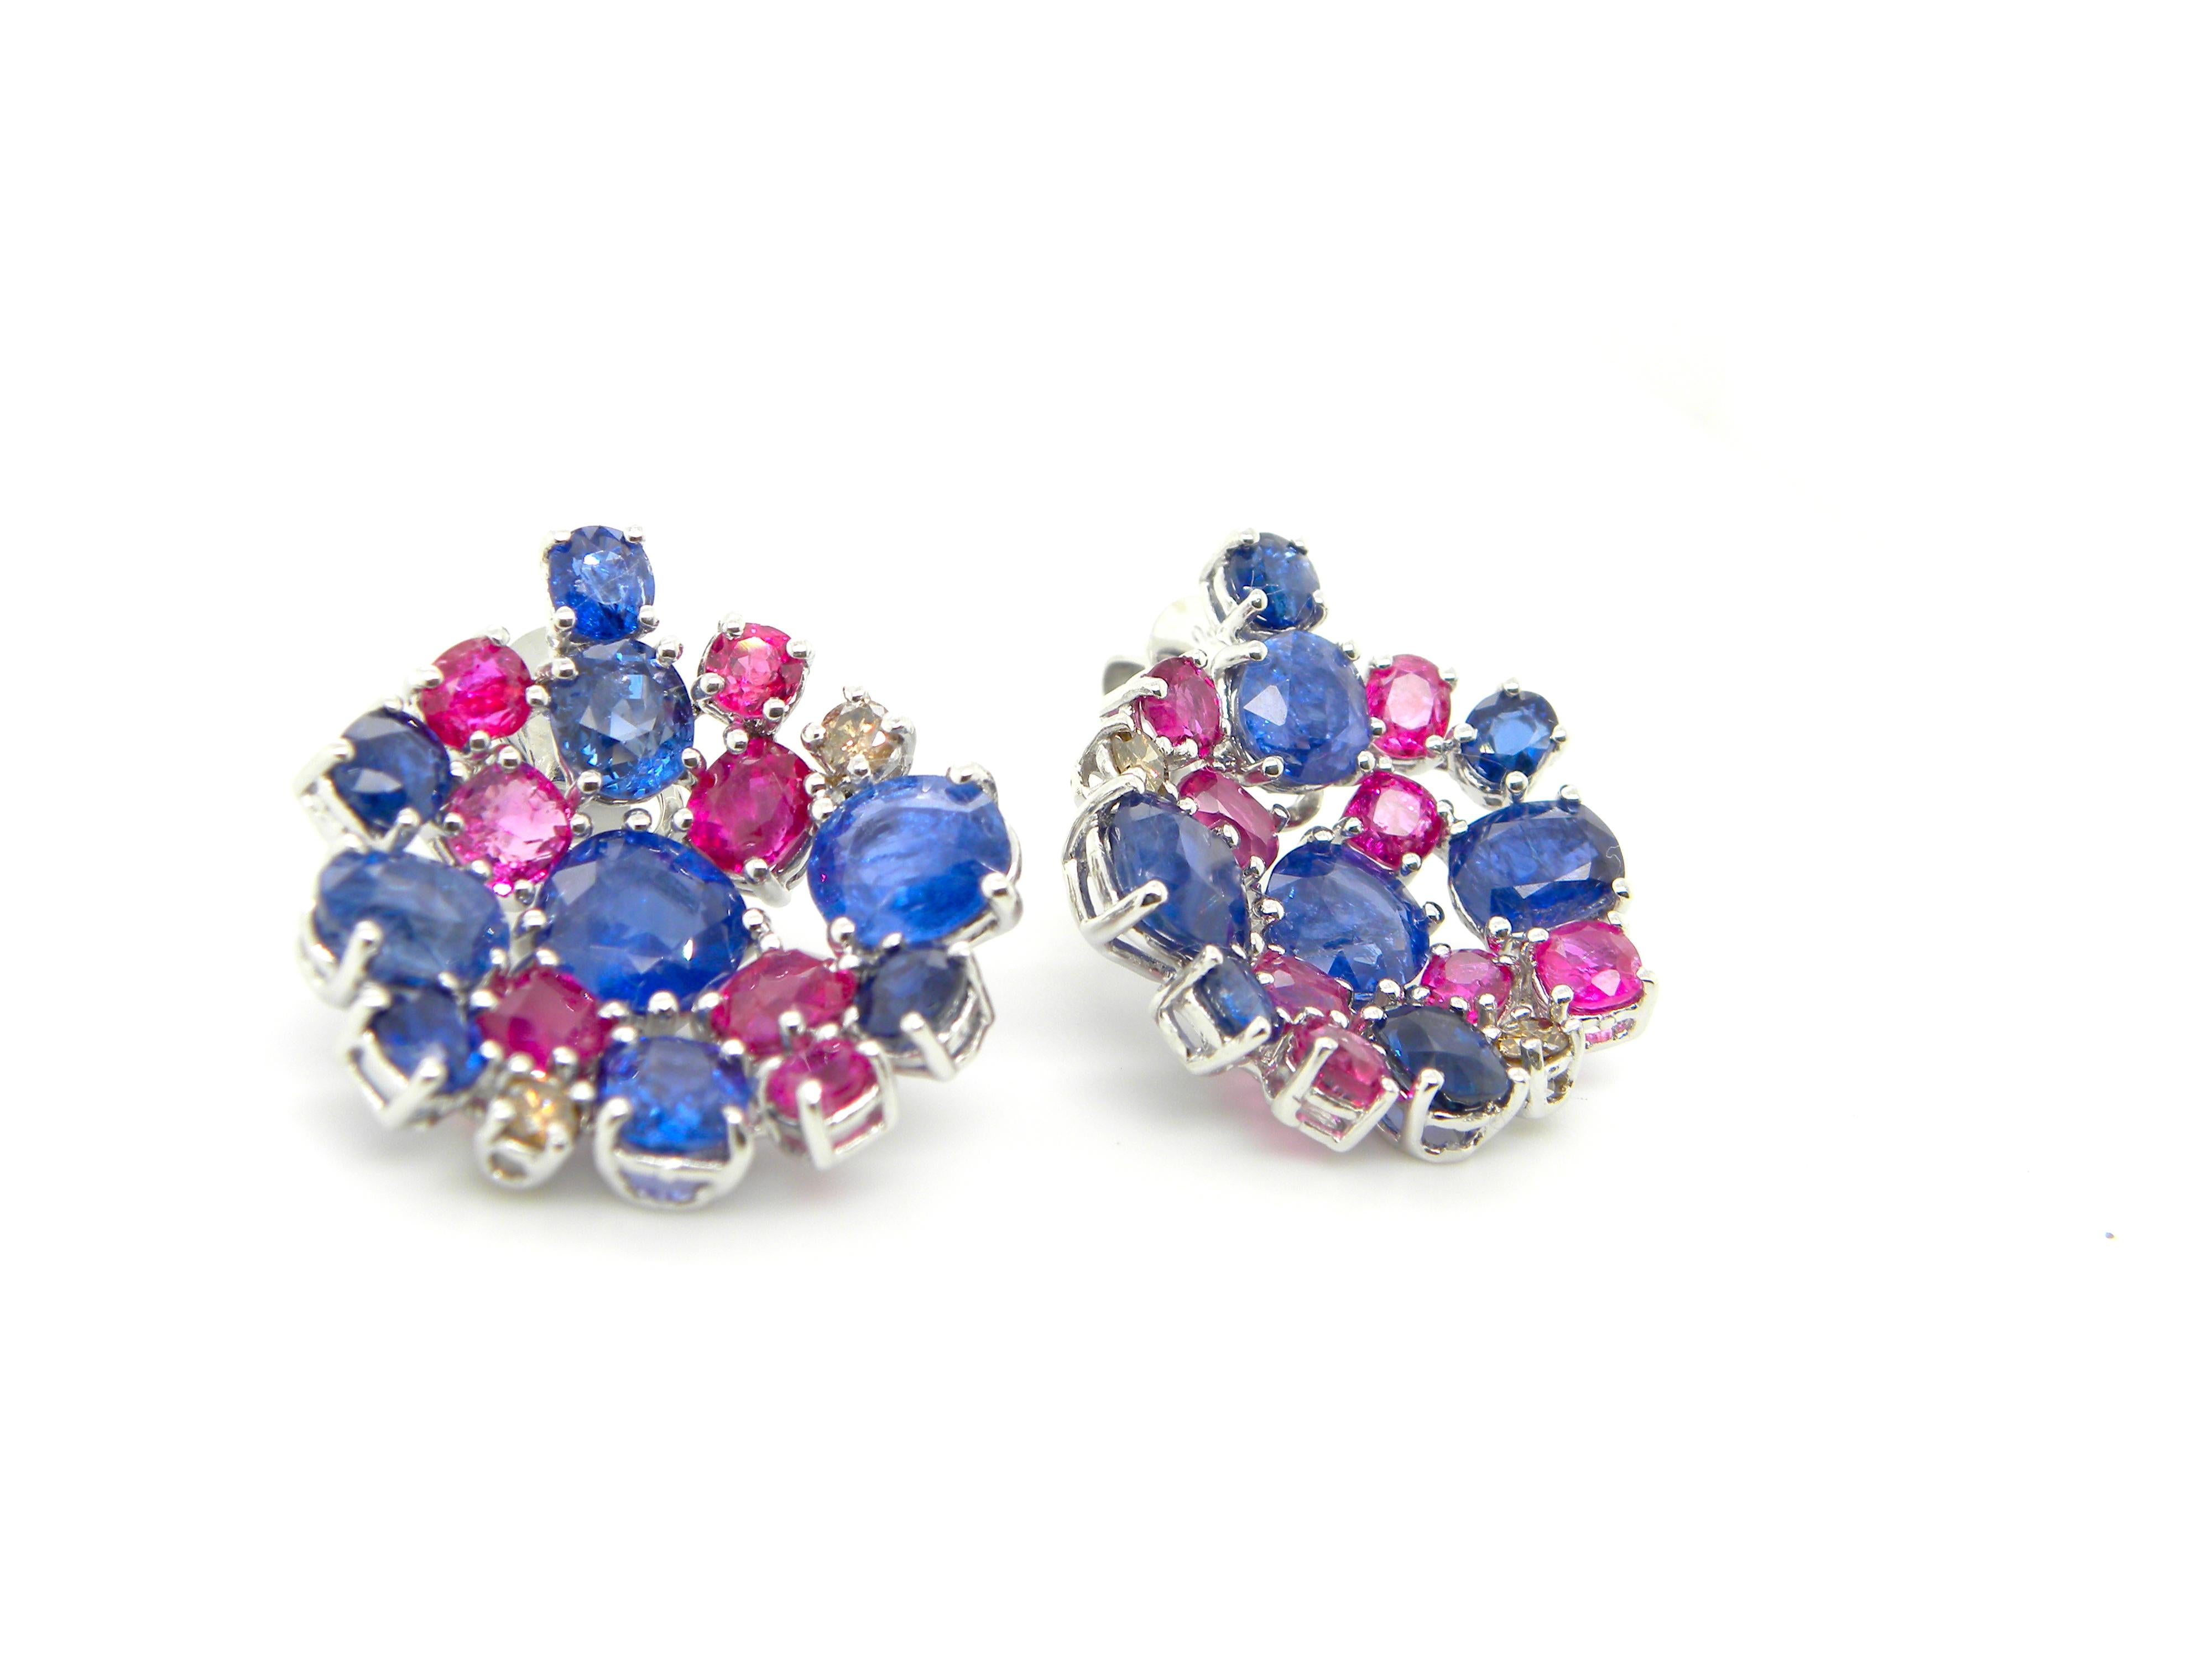 Contemporary 15.4 Carat Unheated Burmese Ruby and Blue Sapphire White Gold Cluster Earrings